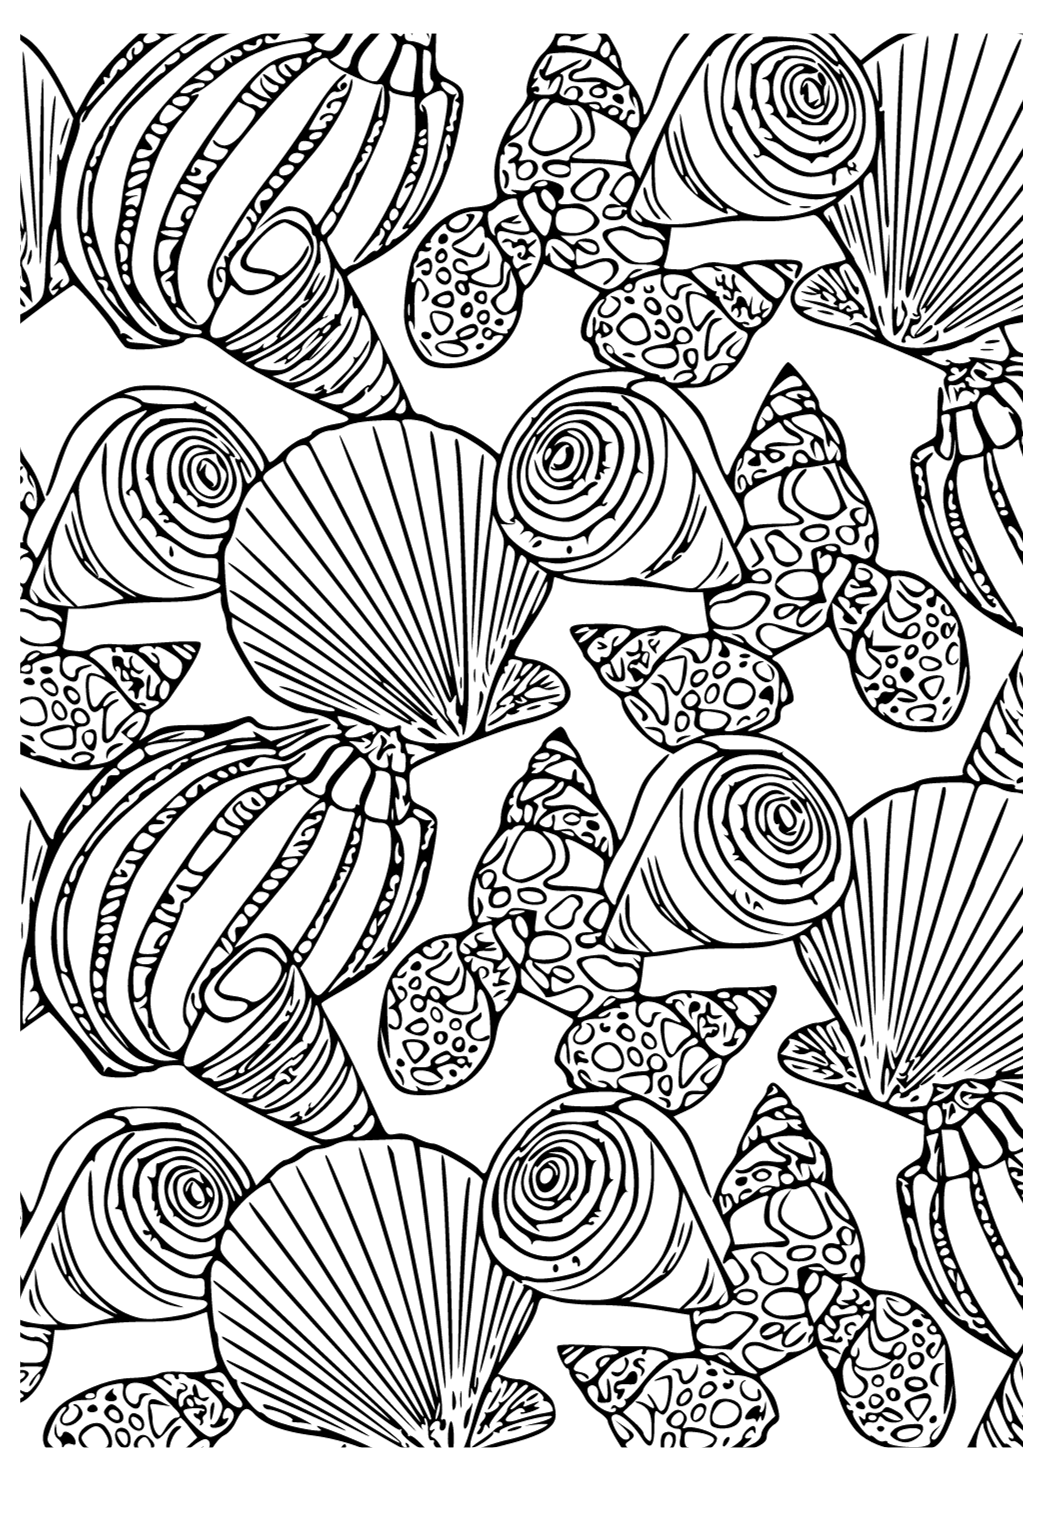 Free printable seashell background coloring page for adults and kids